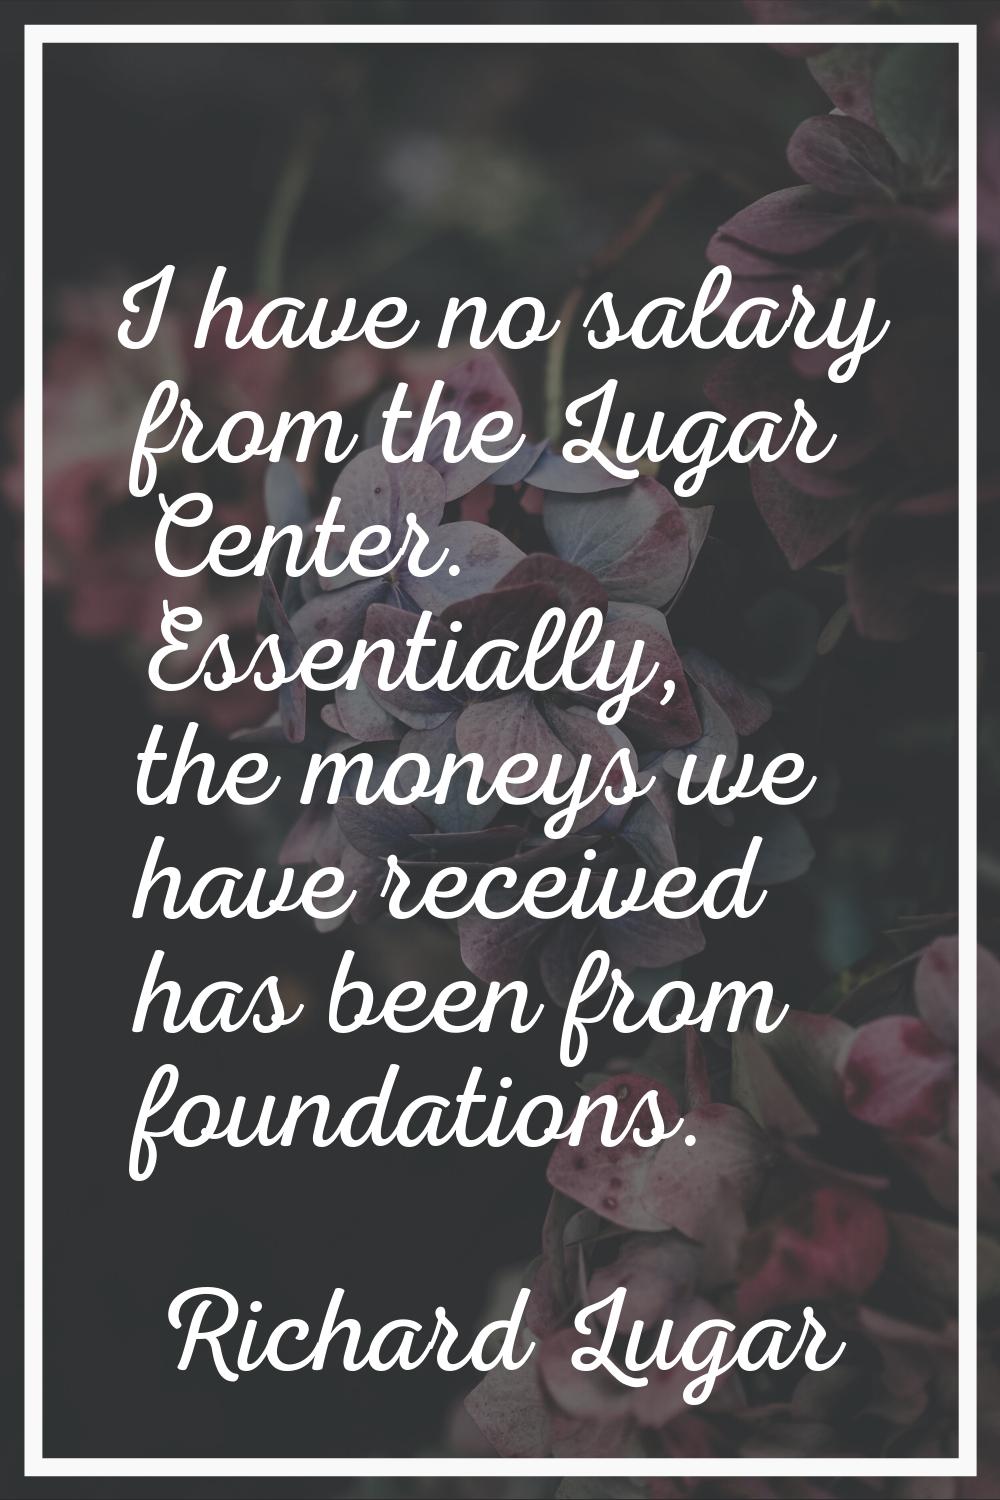 I have no salary from the Lugar Center. Essentially, the moneys we have received has been from foun